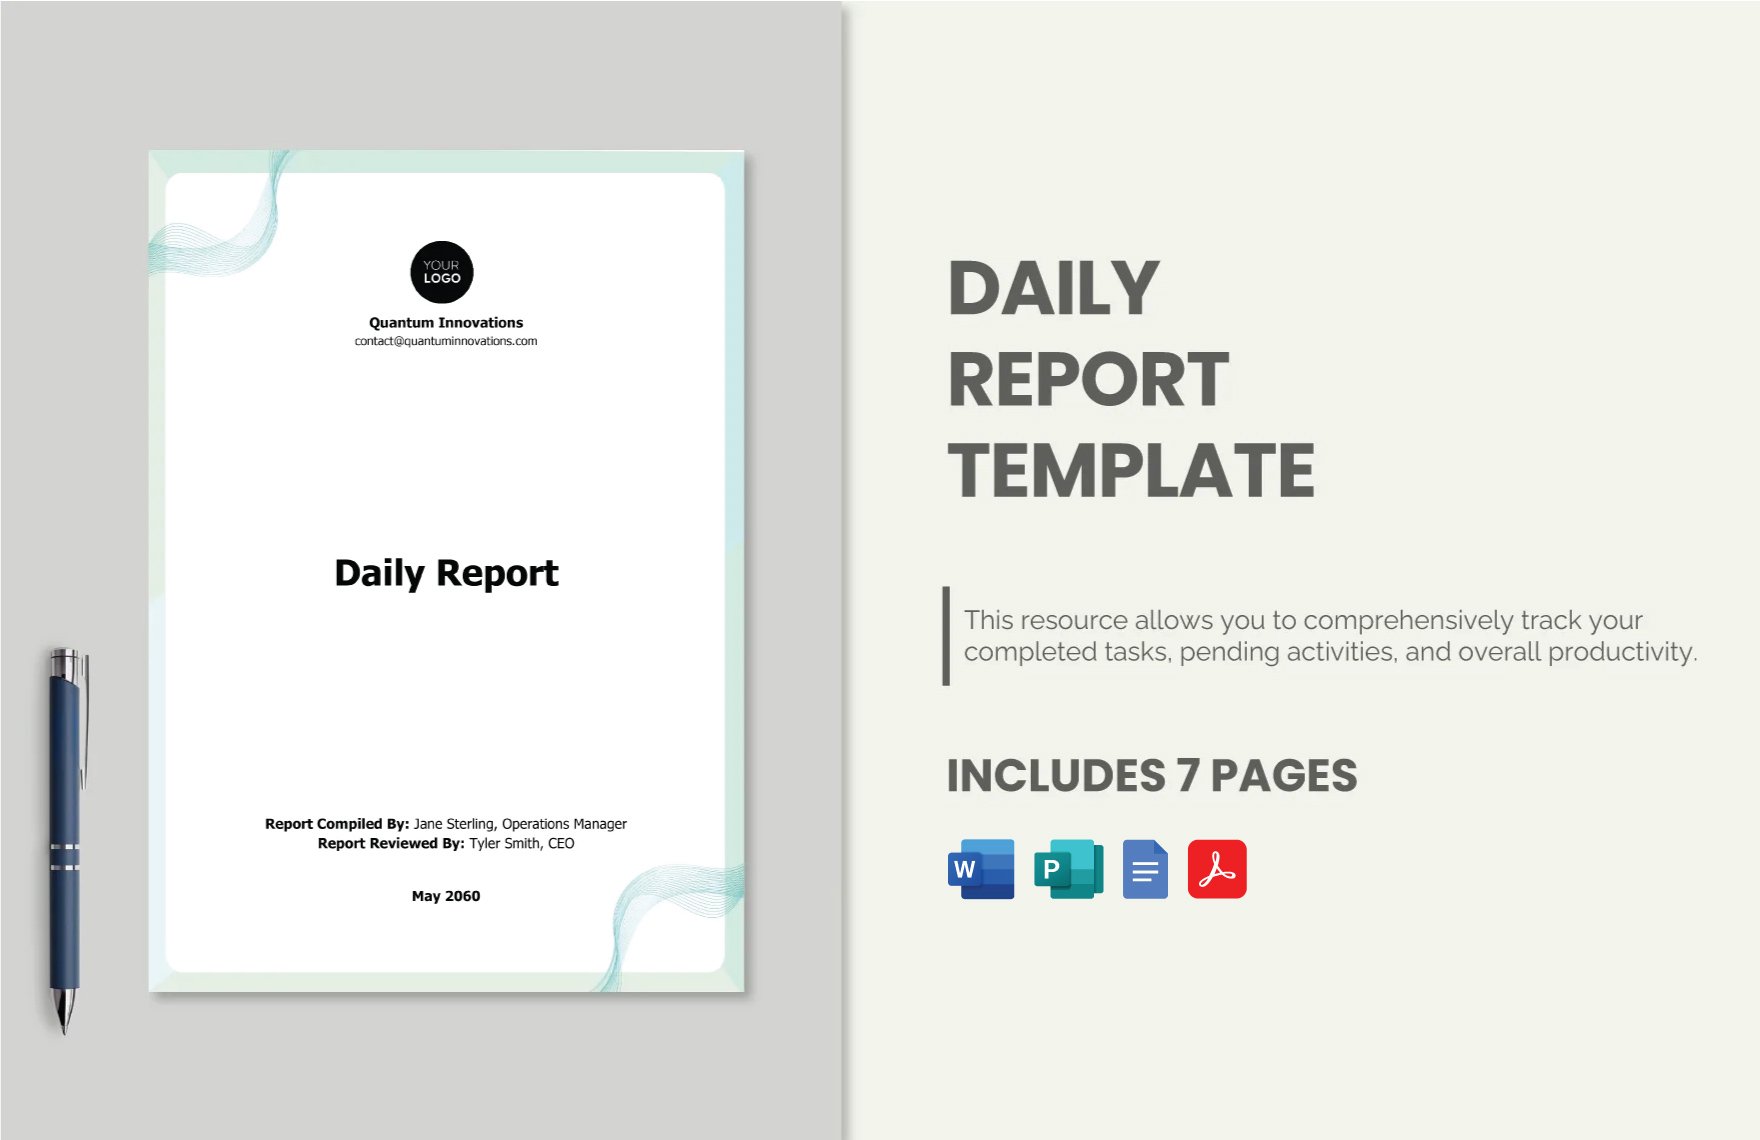 Daily Report Template in Word, Google Docs, PDF, Publisher